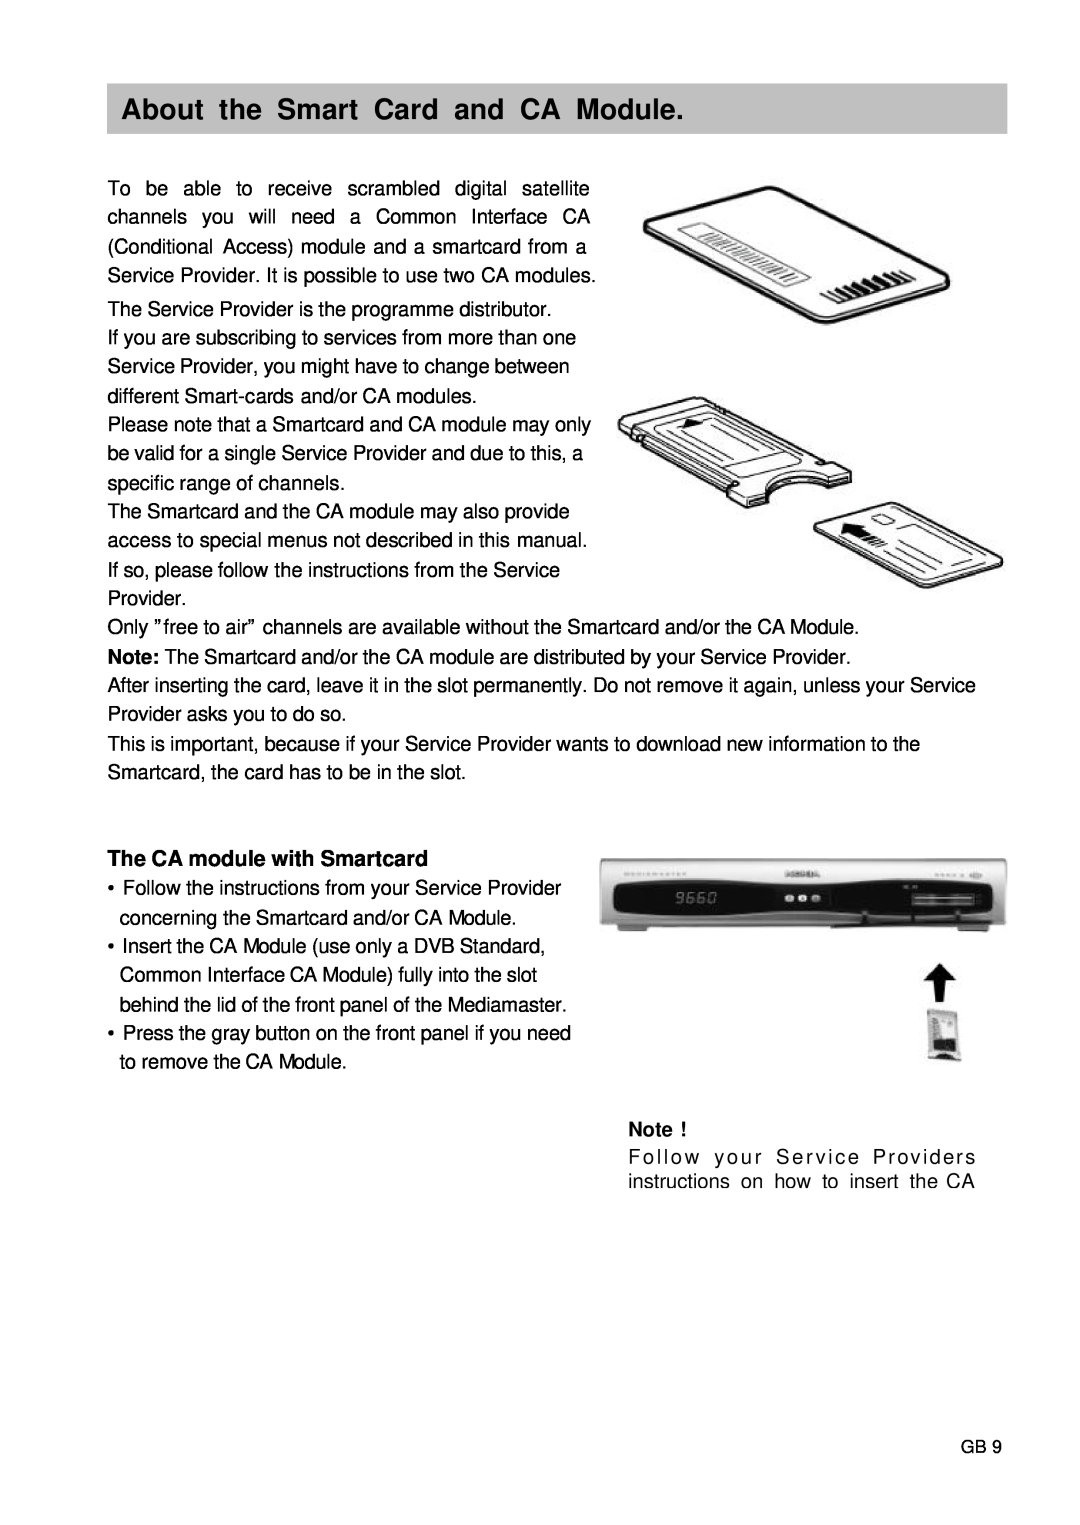 Nokia 9660S owner manual About the Smart Card and CA Module, The CA module with Smartcard 